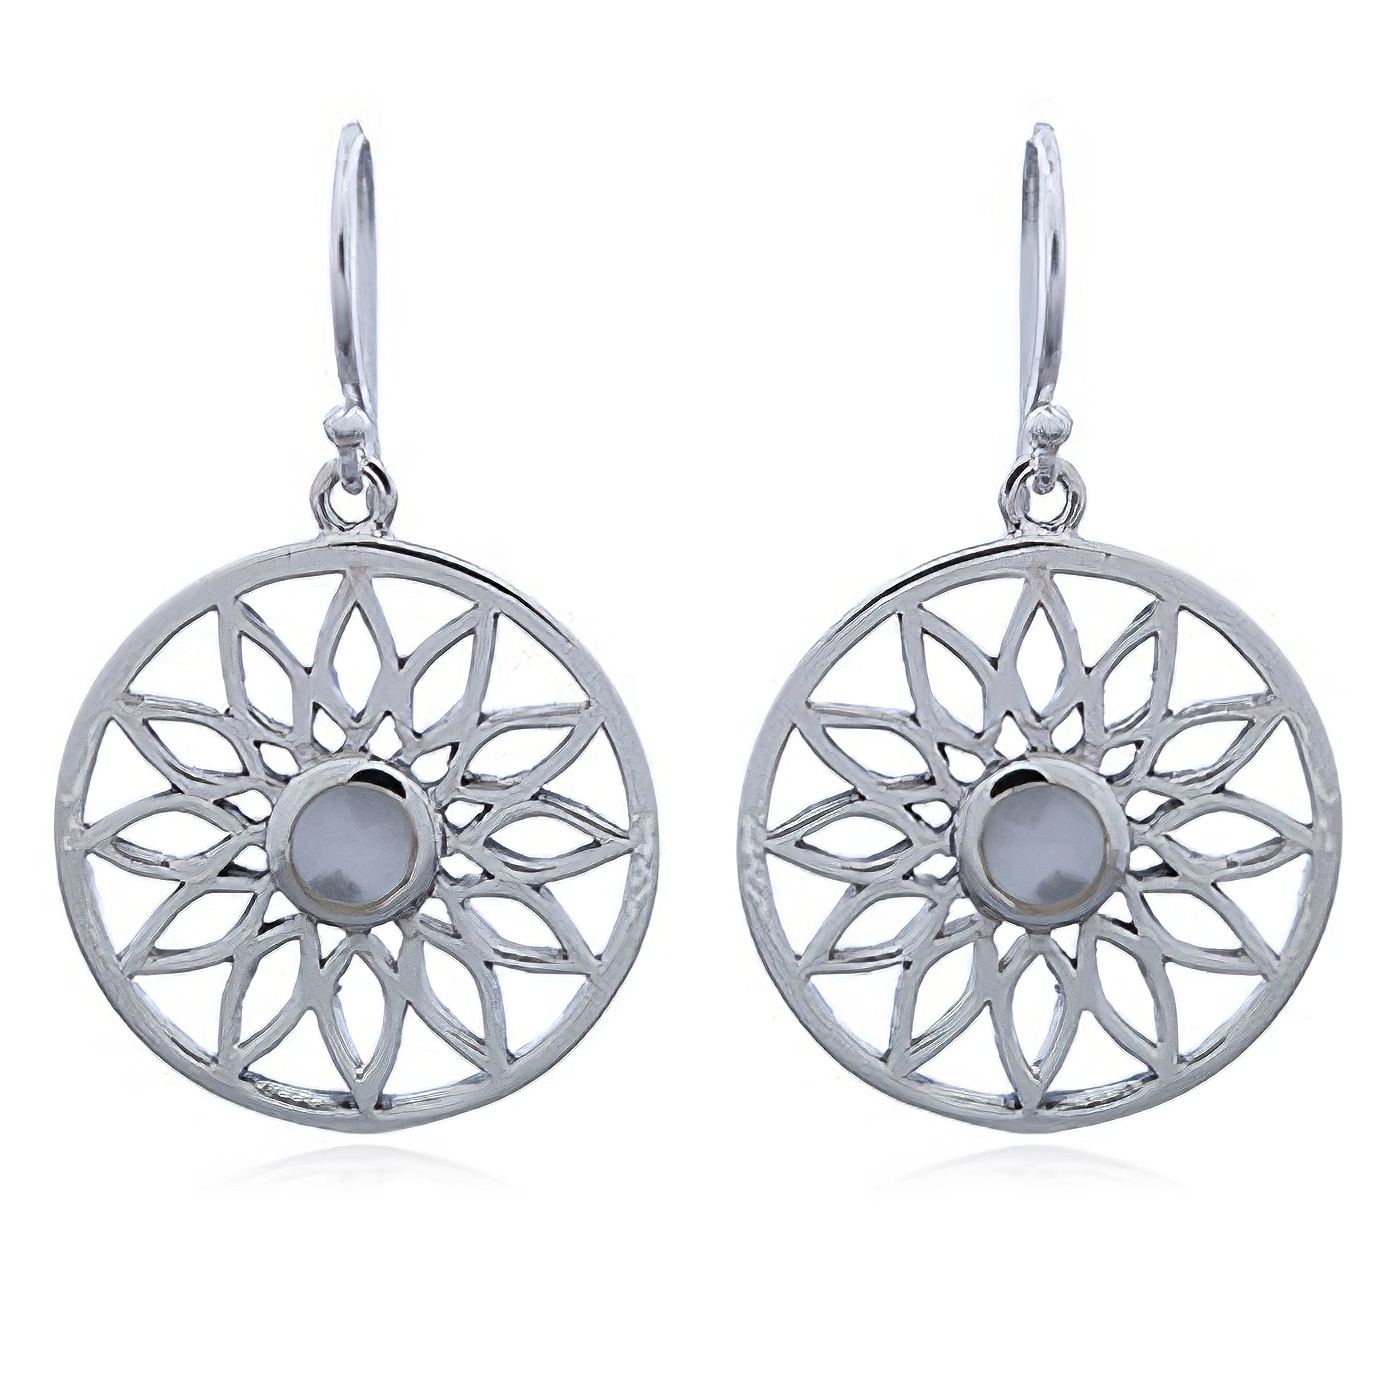 Round Silver Flower Earrings with Mother of Pearl by BeYindi 